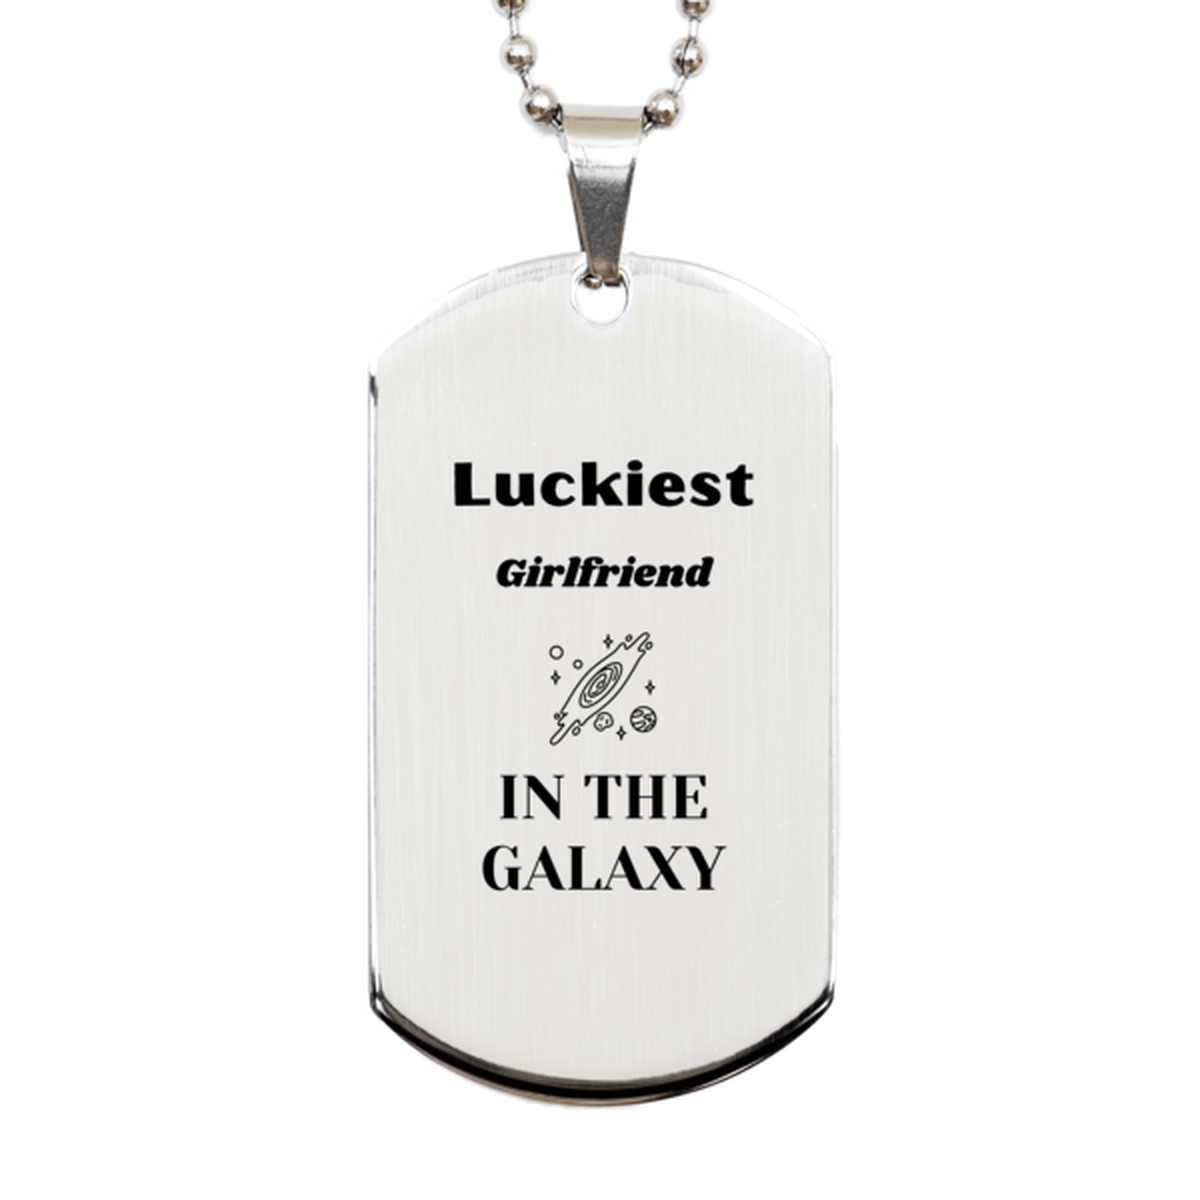 Luckiest Girlfriend in the Galaxy, To My Girlfriend Engraved Gifts, Christmas Girlfriend Silver Dog Tag Gifts, X-mas Birthday Unique Gifts For Girlfriend Men Women